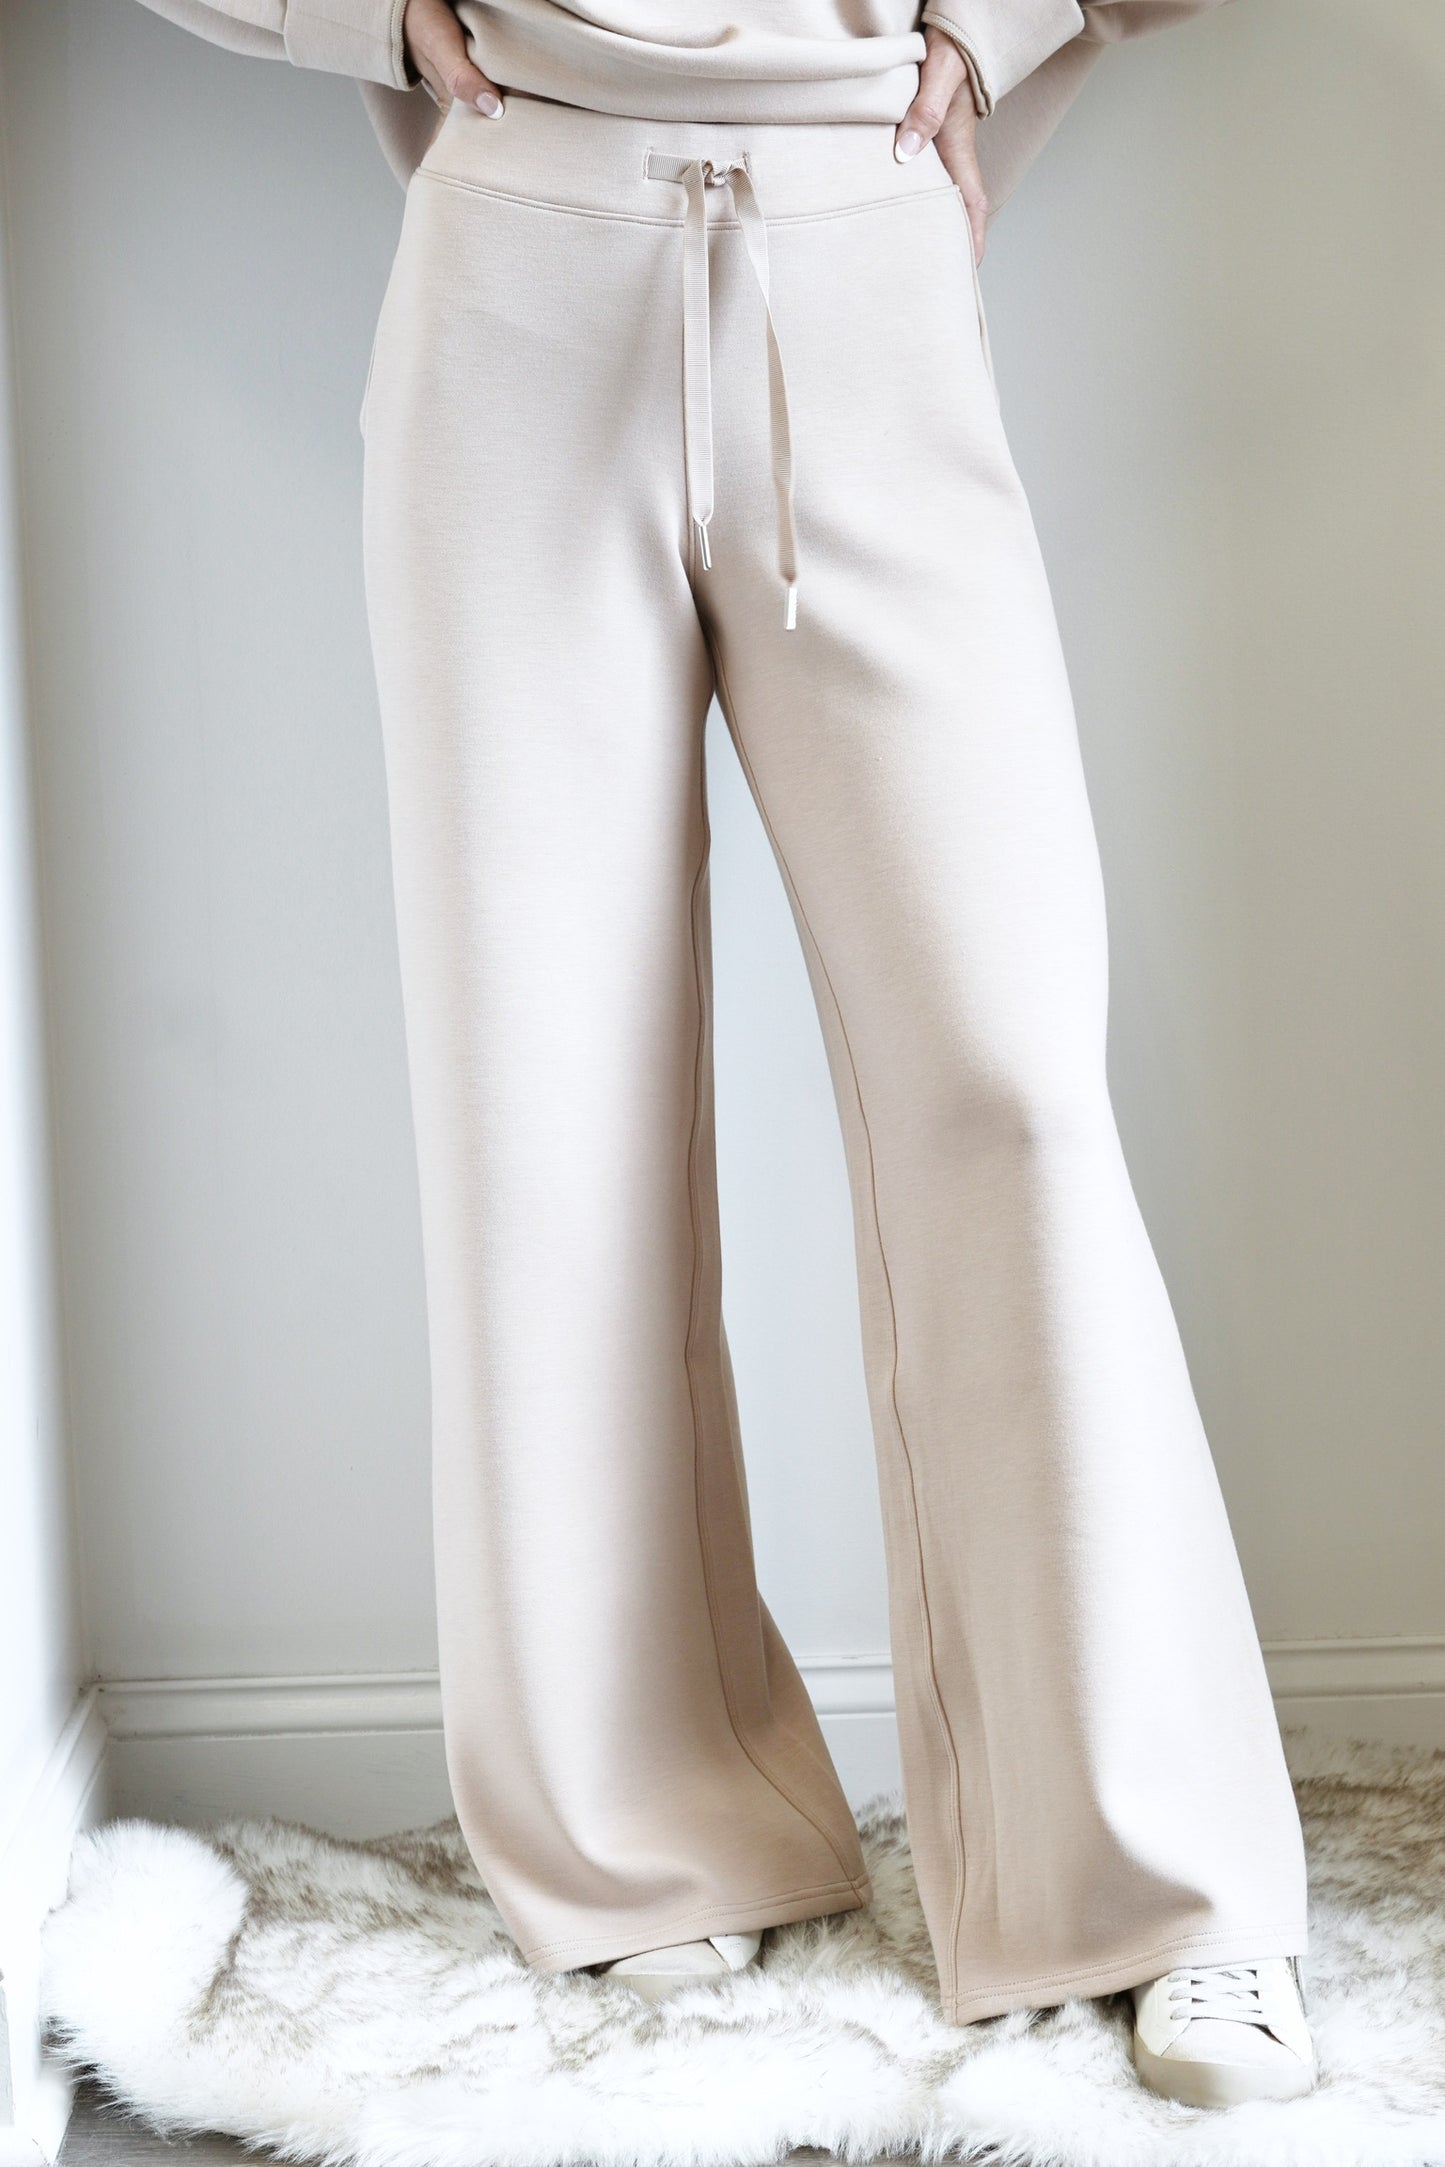 Spanx AirEssentials Wide Leg Sweatpants Drawstring Elastic Waistband Wide Legs Mid-Rise Full Length Relaxed fit with leg-lengthening wide leg Colors: Taupe 47% Modal, 46% Polyester, 7% Elastane